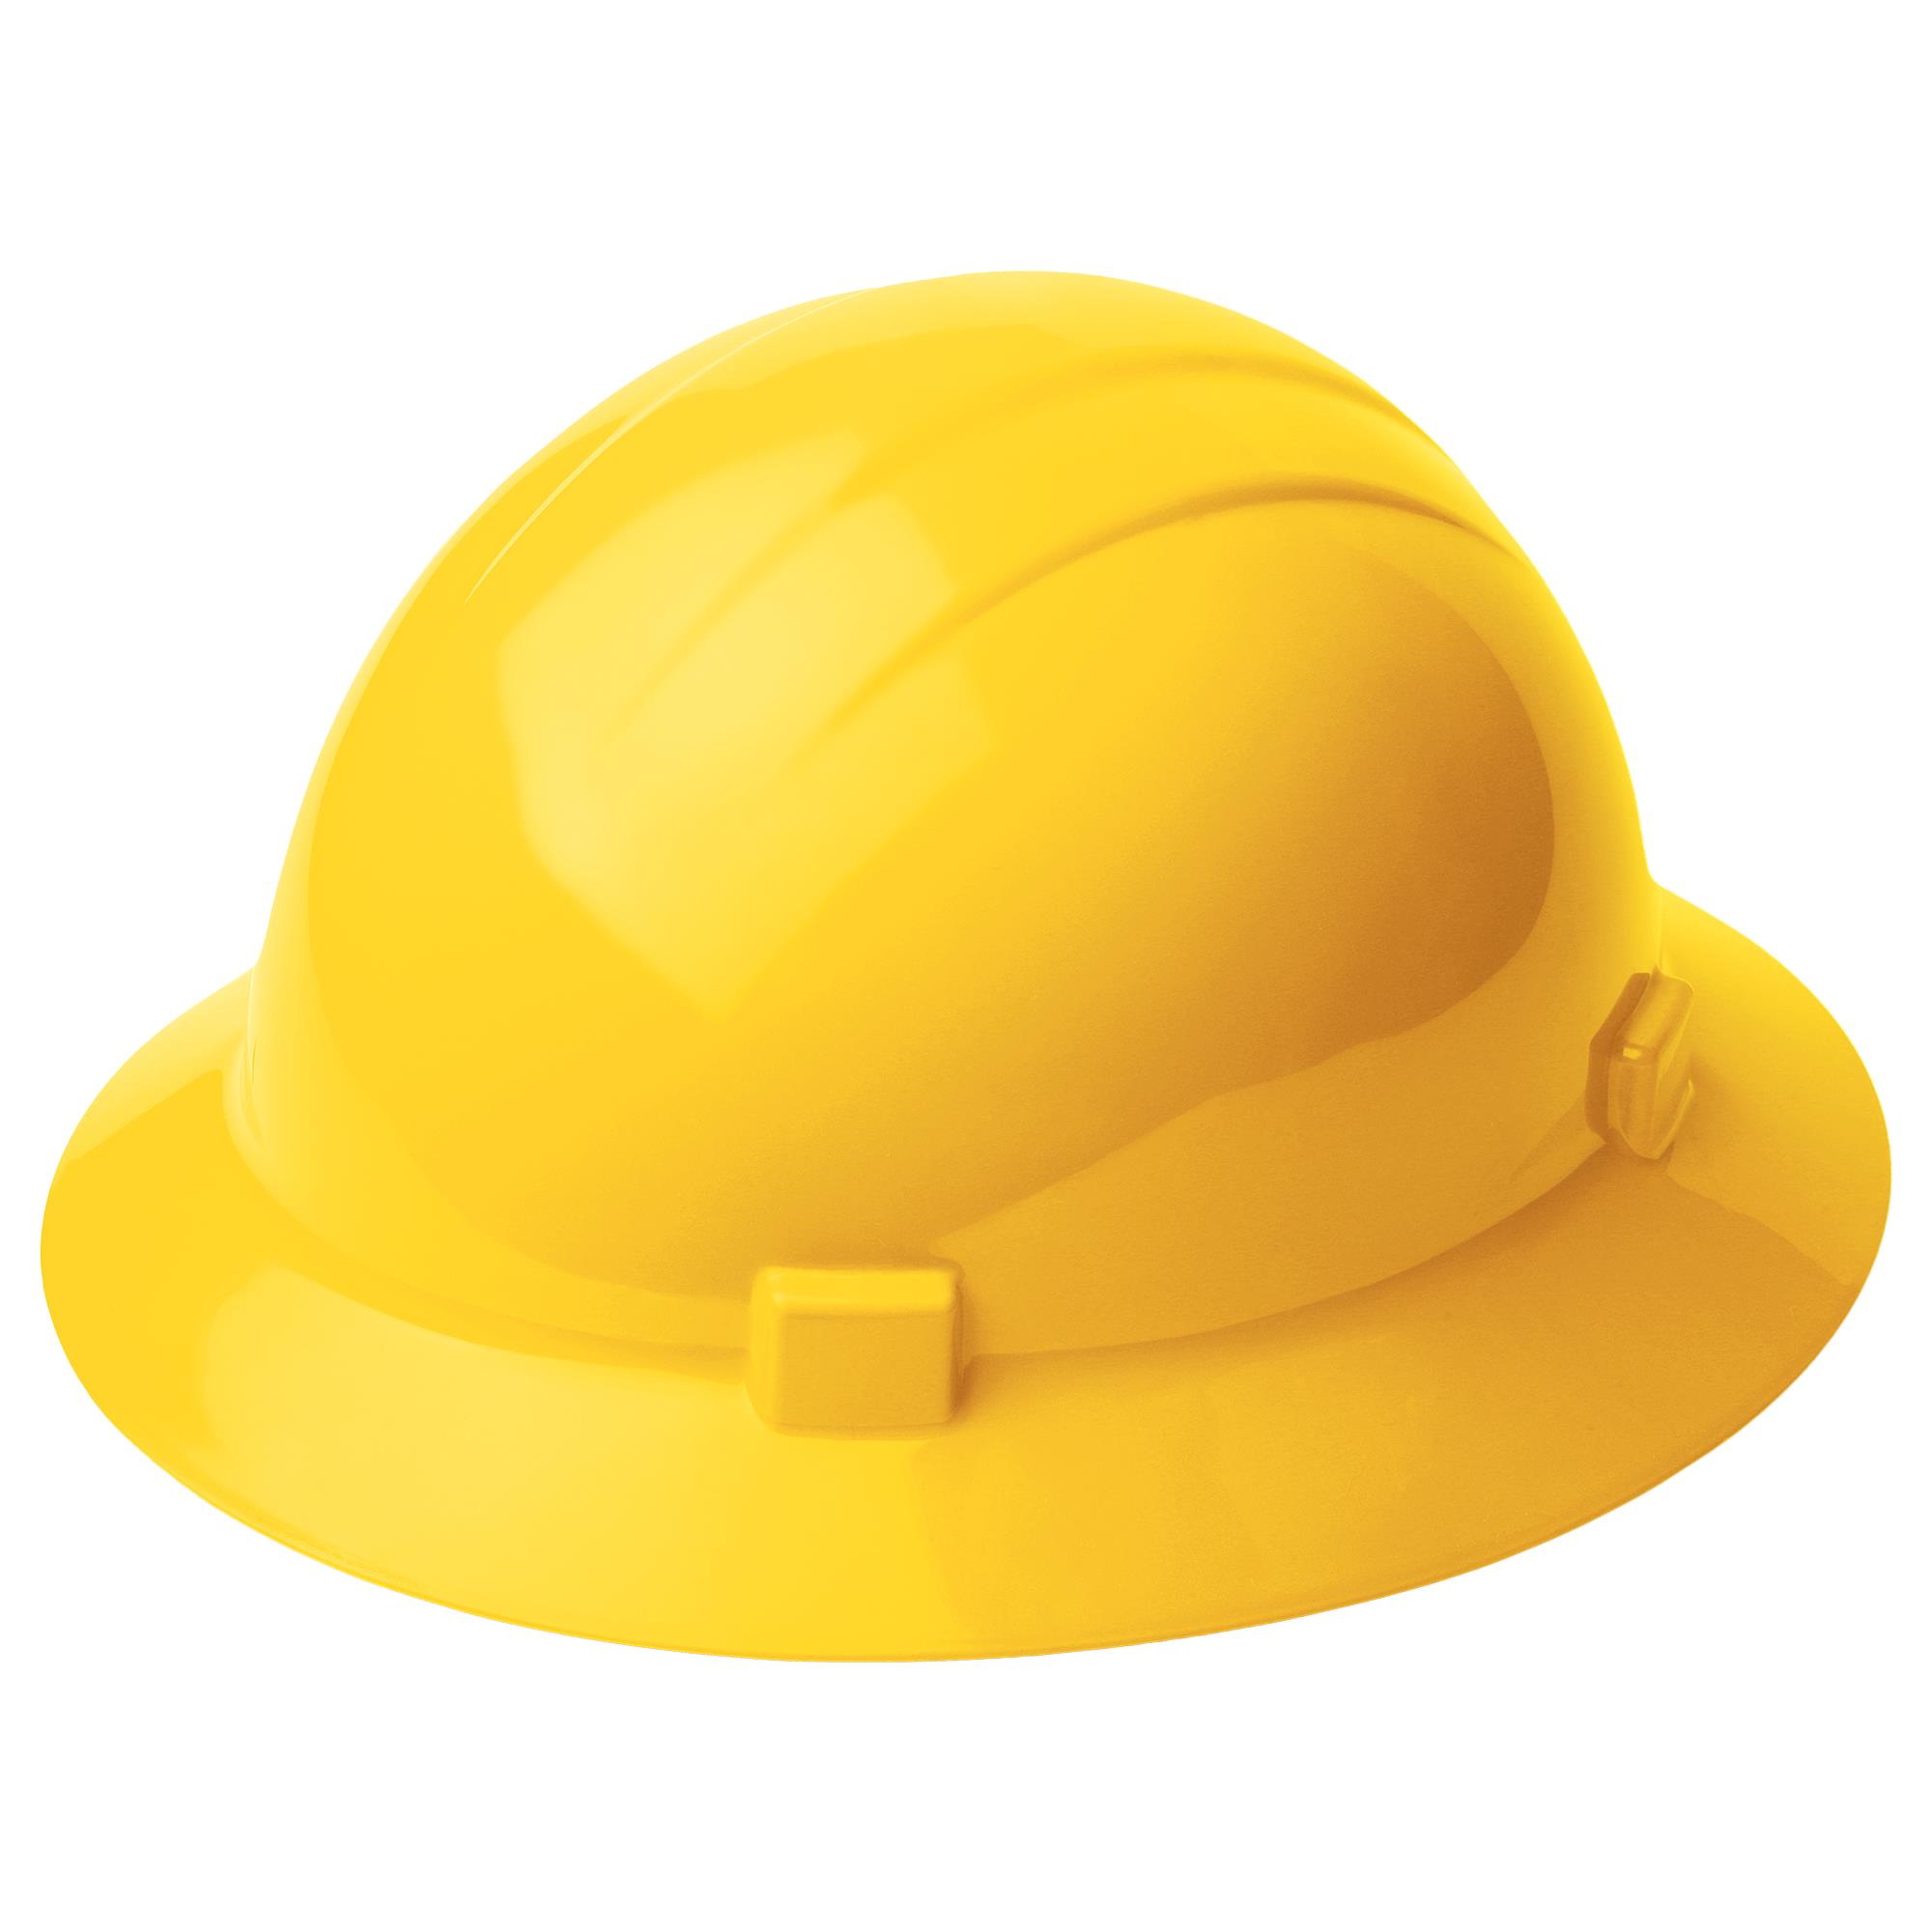 ERB Americana Full Brim Hard Hat from Columbia Safety